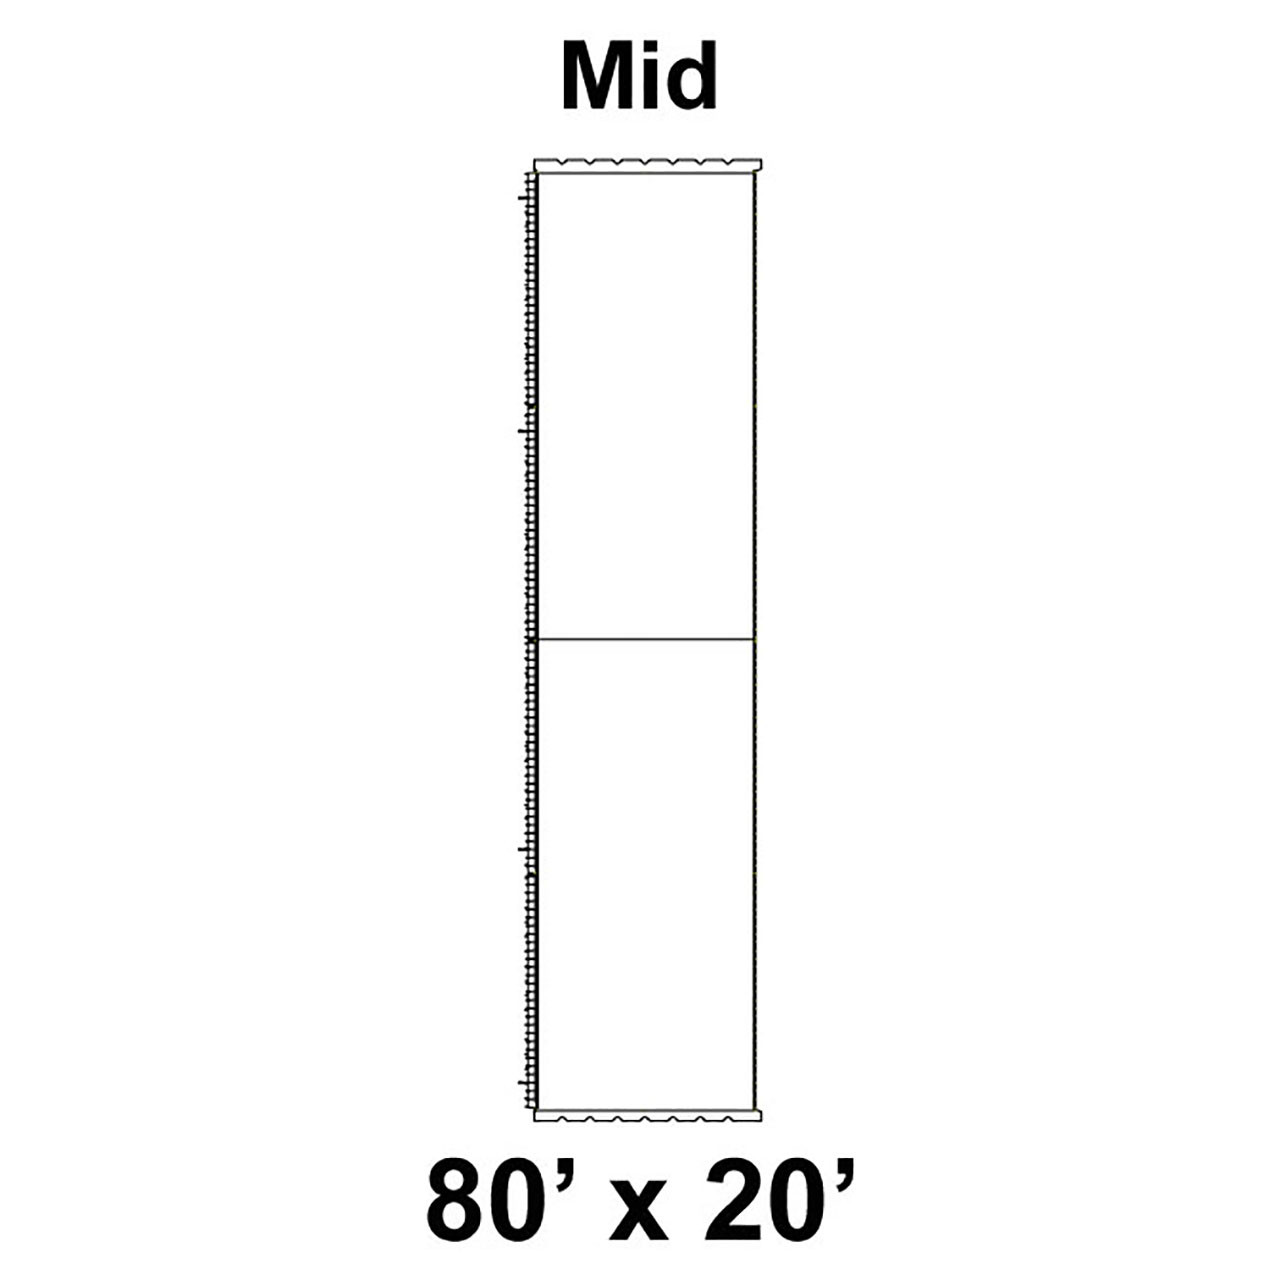 80' x 20' Classic Pole Tent Top, Mid Section